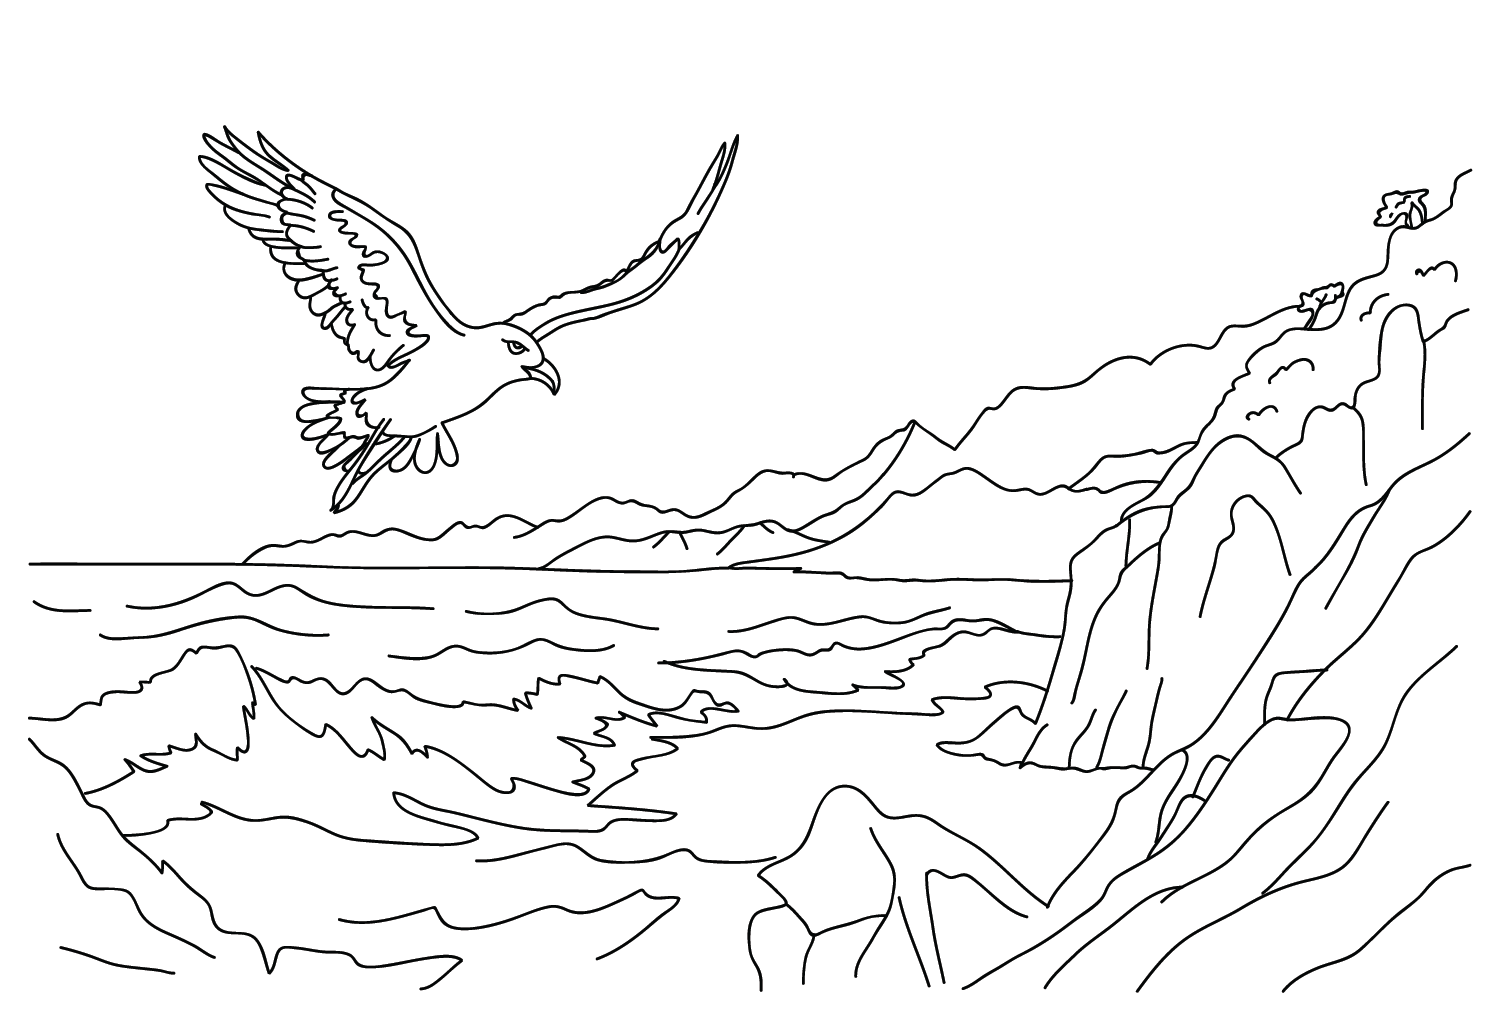 Albatross Coloring Pages to Print from Albatross